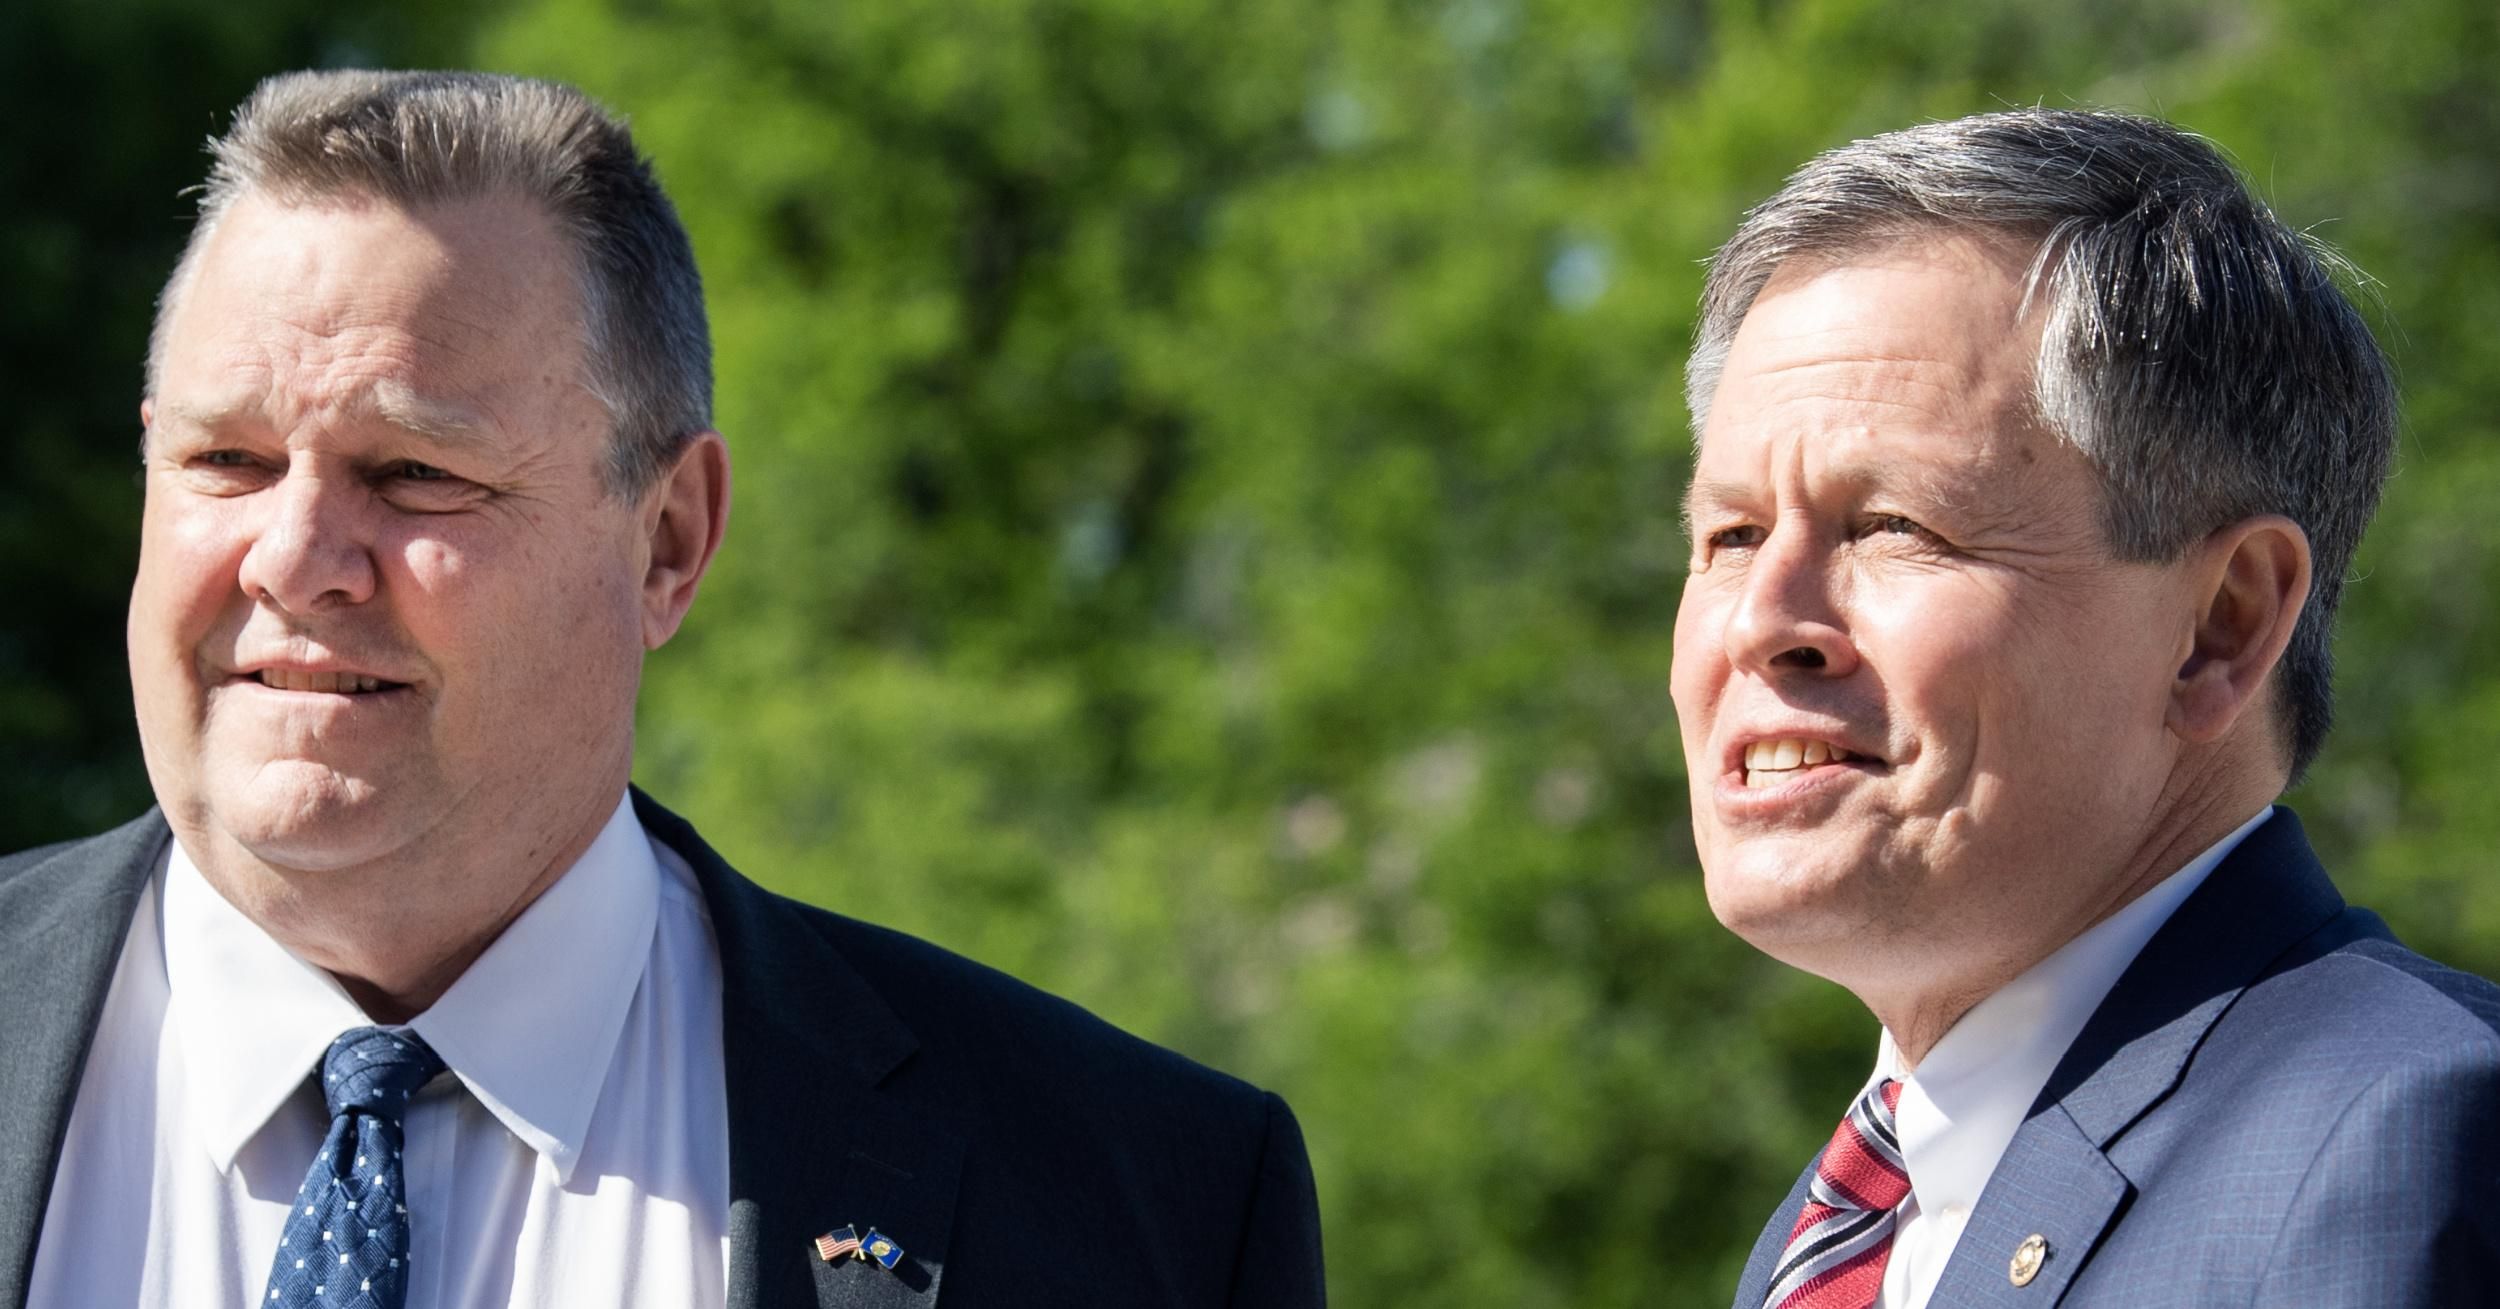 Sens. Jon Tester, D-Mont., left, and Steve Daines, R-Mont. (Photo: Tom Williams/CQ-Roll Call, Inc via Getty Images)